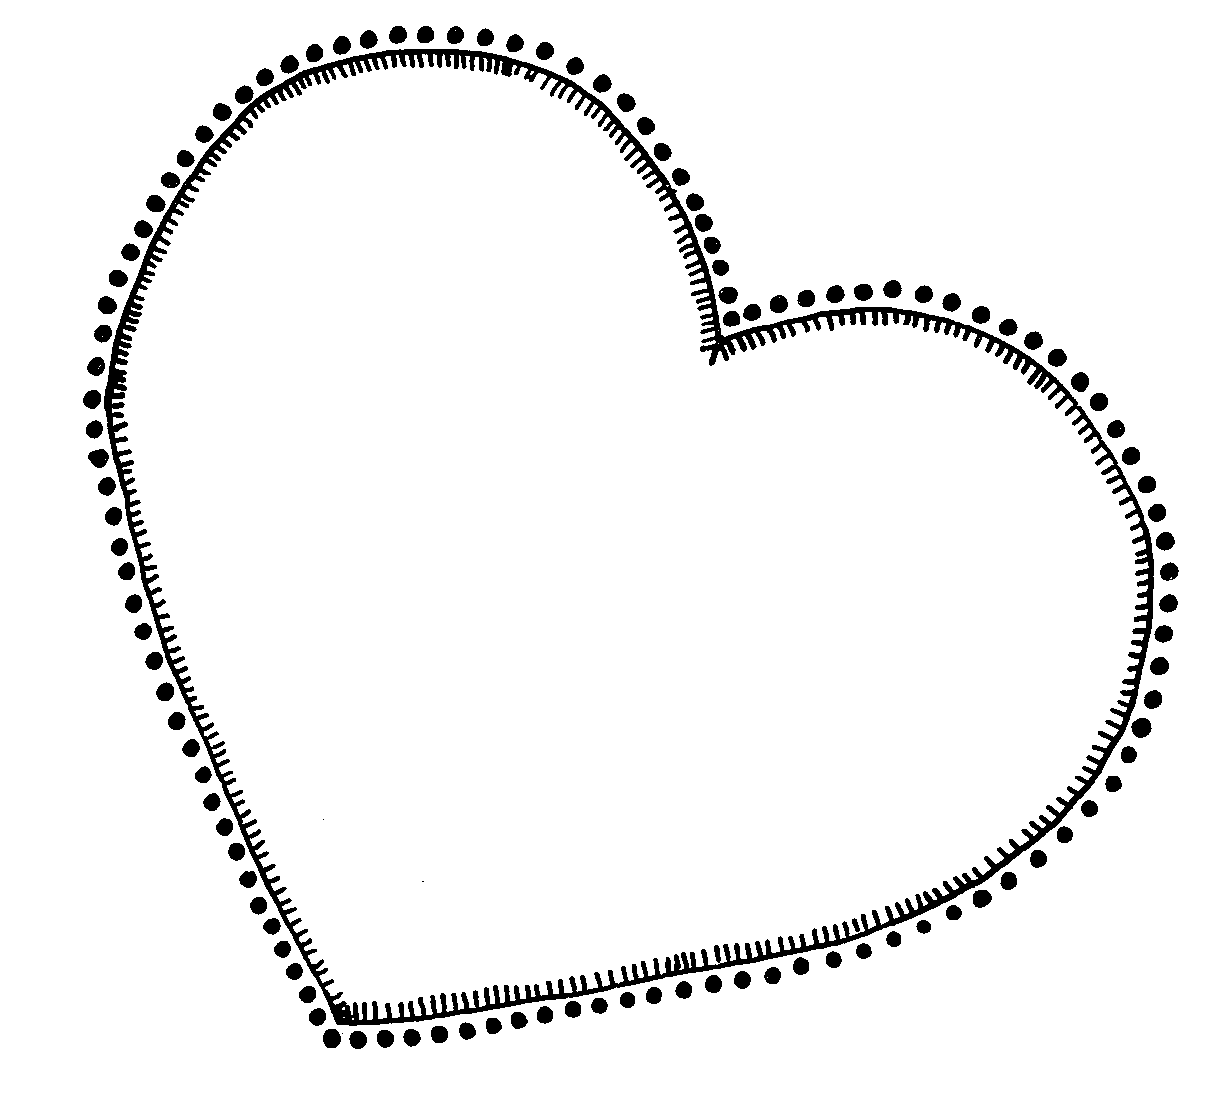 Heart Clipart Black And White - HD clipart file - valentine heart clipart black and white, swirl heart clipart, open heart large jane seymour clip art, interlocking hearts clipart, heart with cross inside clipart, heart shapes clipart, heart key clipart, heart clipart png, heart clip art, heart border clipart black and white, gold heart clip art, free clip art hearts, drawn heart clipart, dog heart clipart, conversation heart clip art, clipart purple heart, clipart of heart, clipart heart black and white, clip art heart black and white, arrow heart clipart